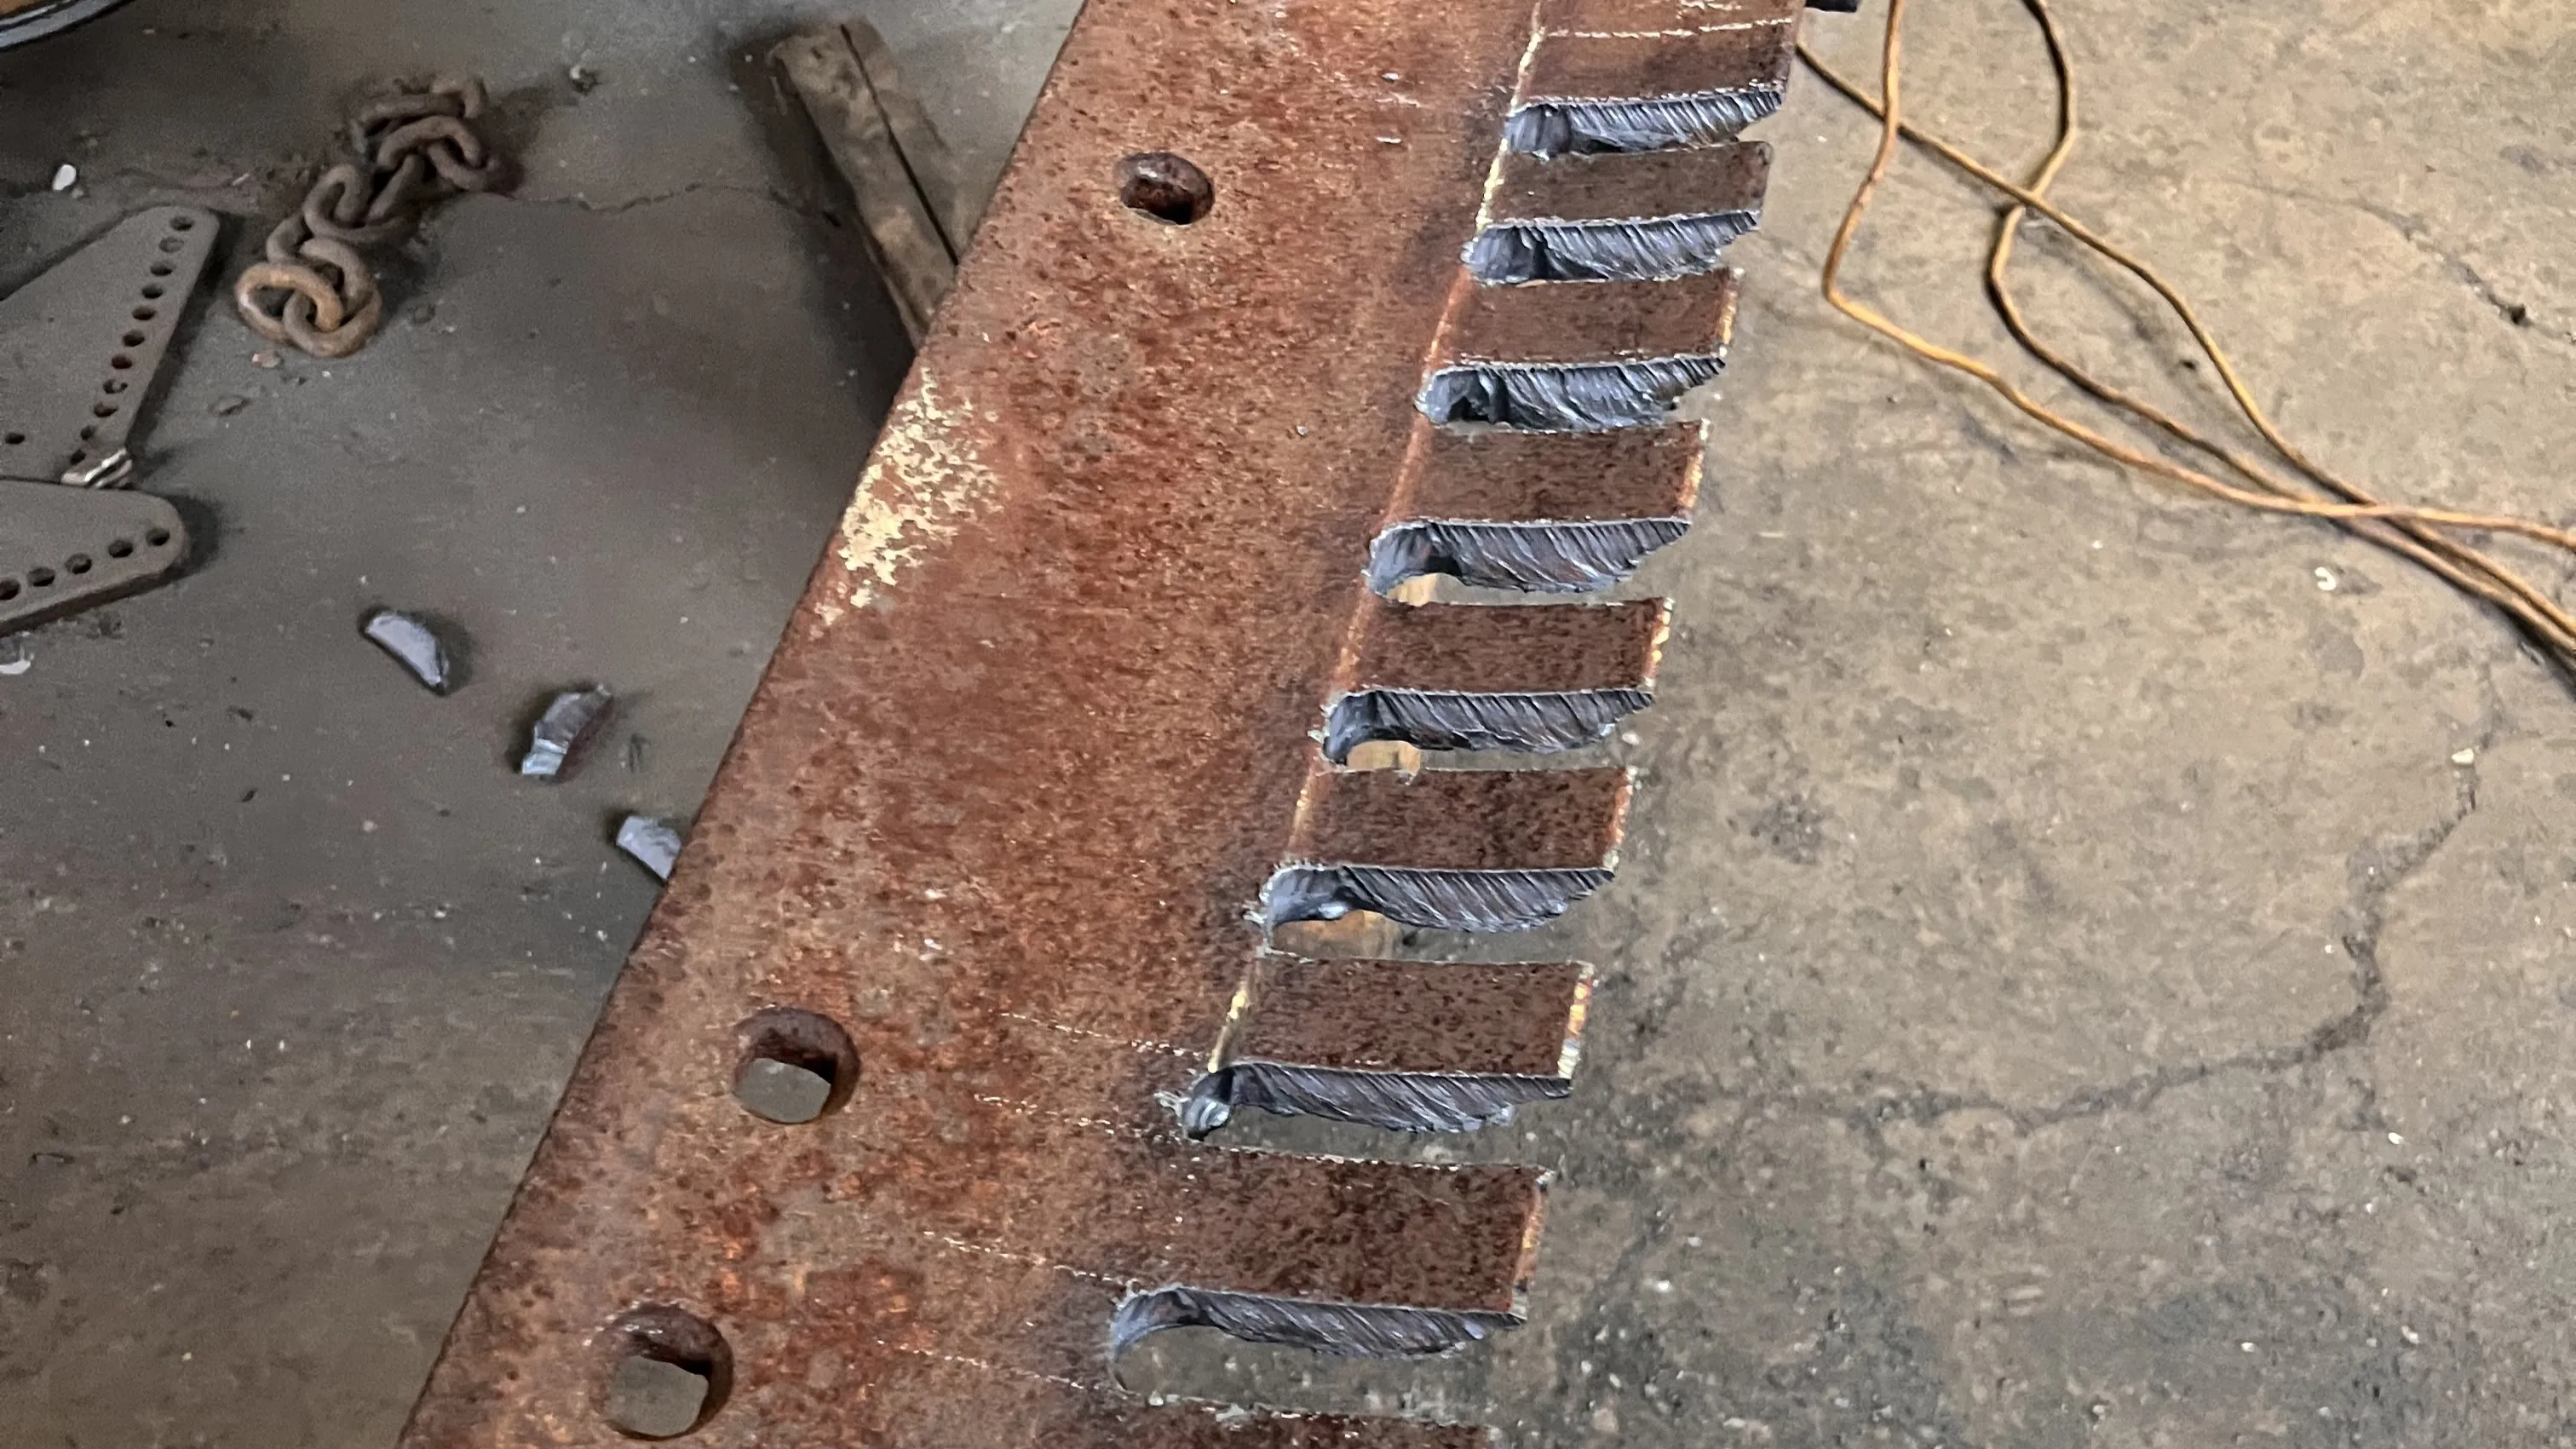 An image of a grader blade with notches cut into it.